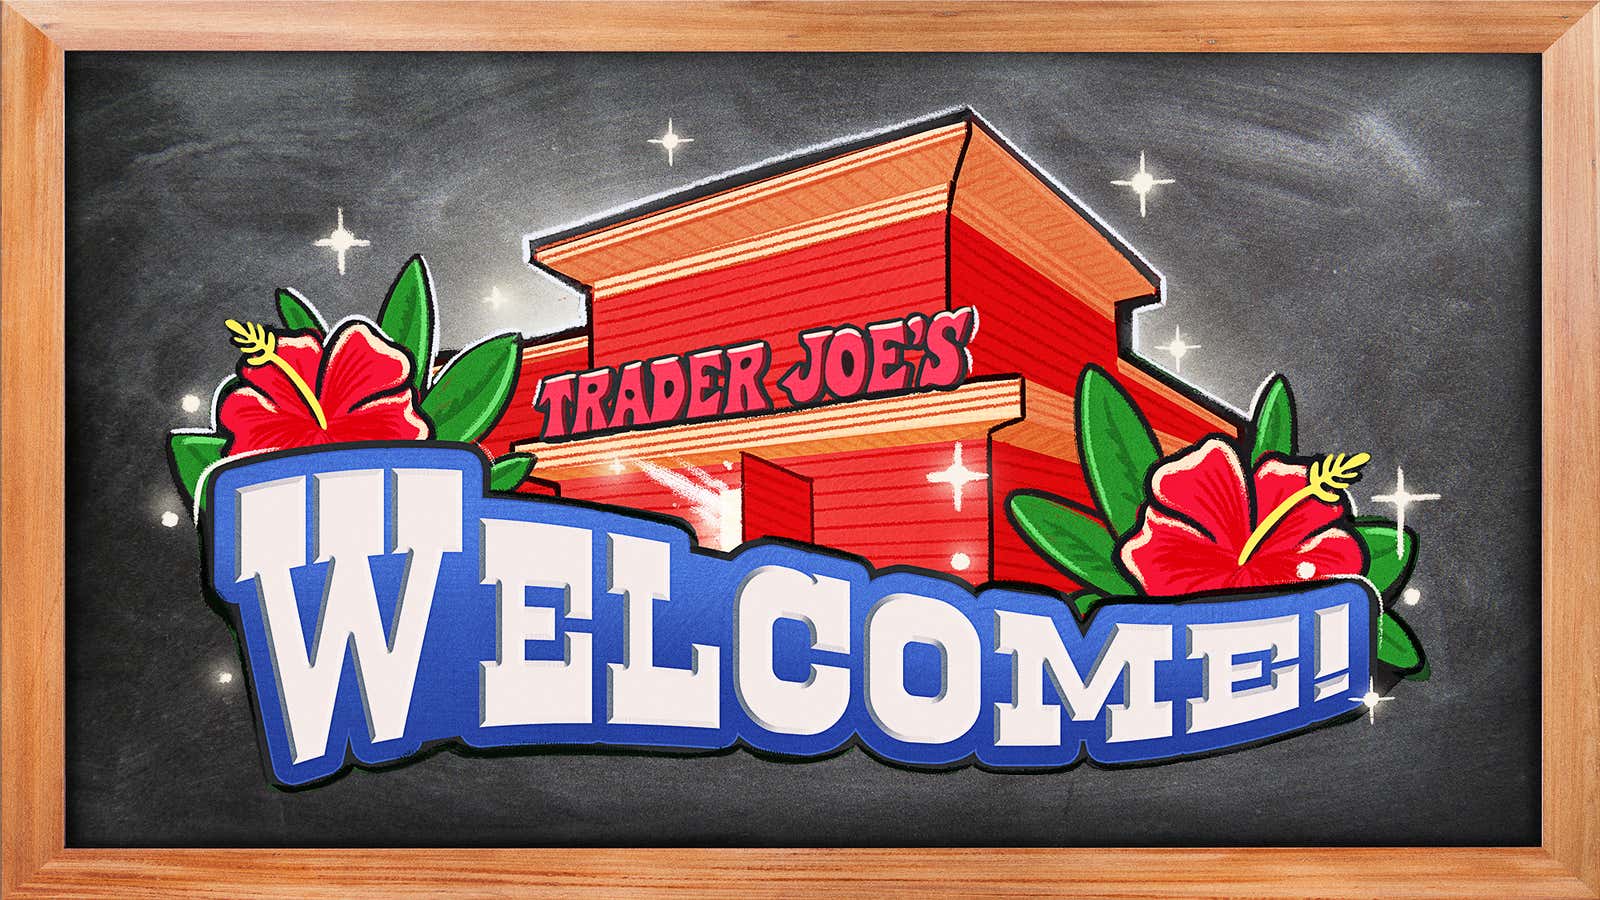 I Just Visited Trader Joe’s for the First Time in My Life